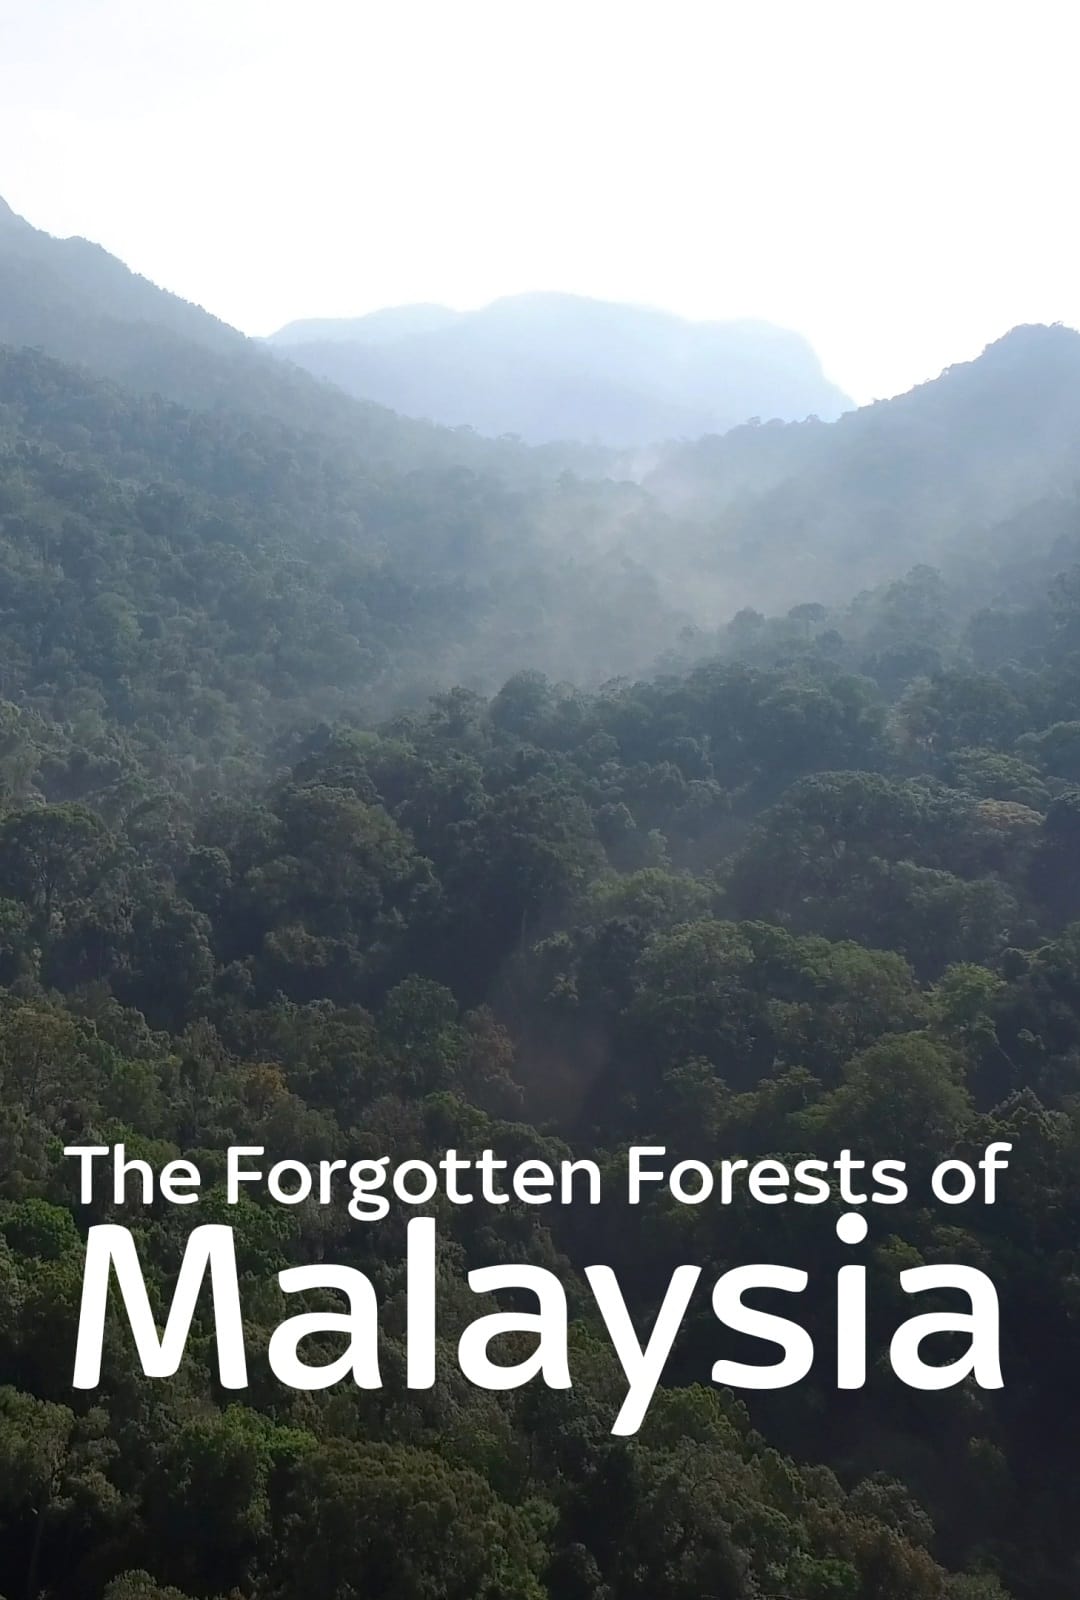 The Forgotten Forests of Malaysia